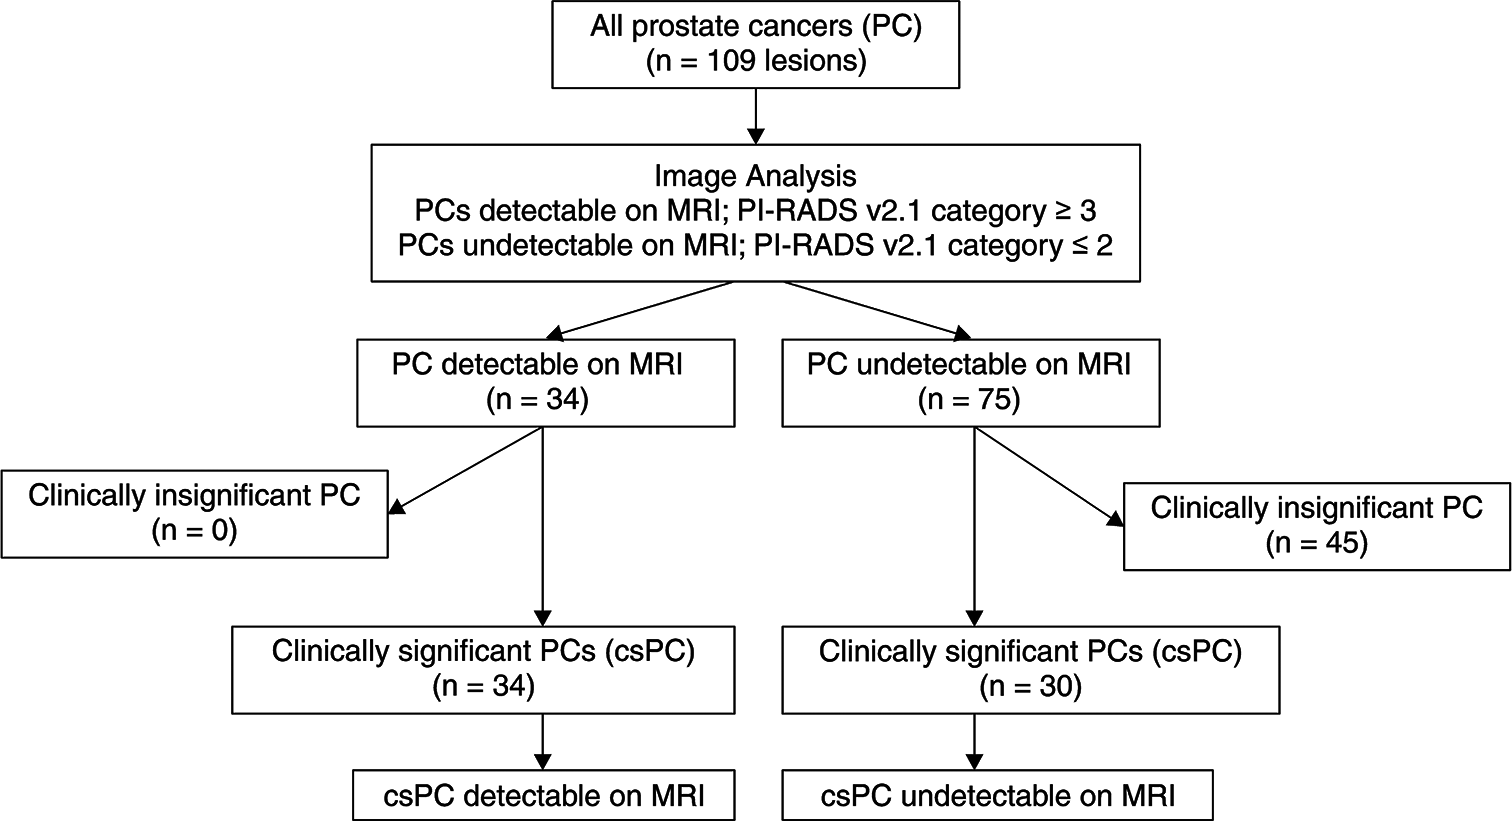 Flowchart of the study. (n: Number of lesions, csPC: Clinically significant prostate cancer, MRI: Magnetic resonance imaging, PI: prostate imaging, RADS: reporting and data system).